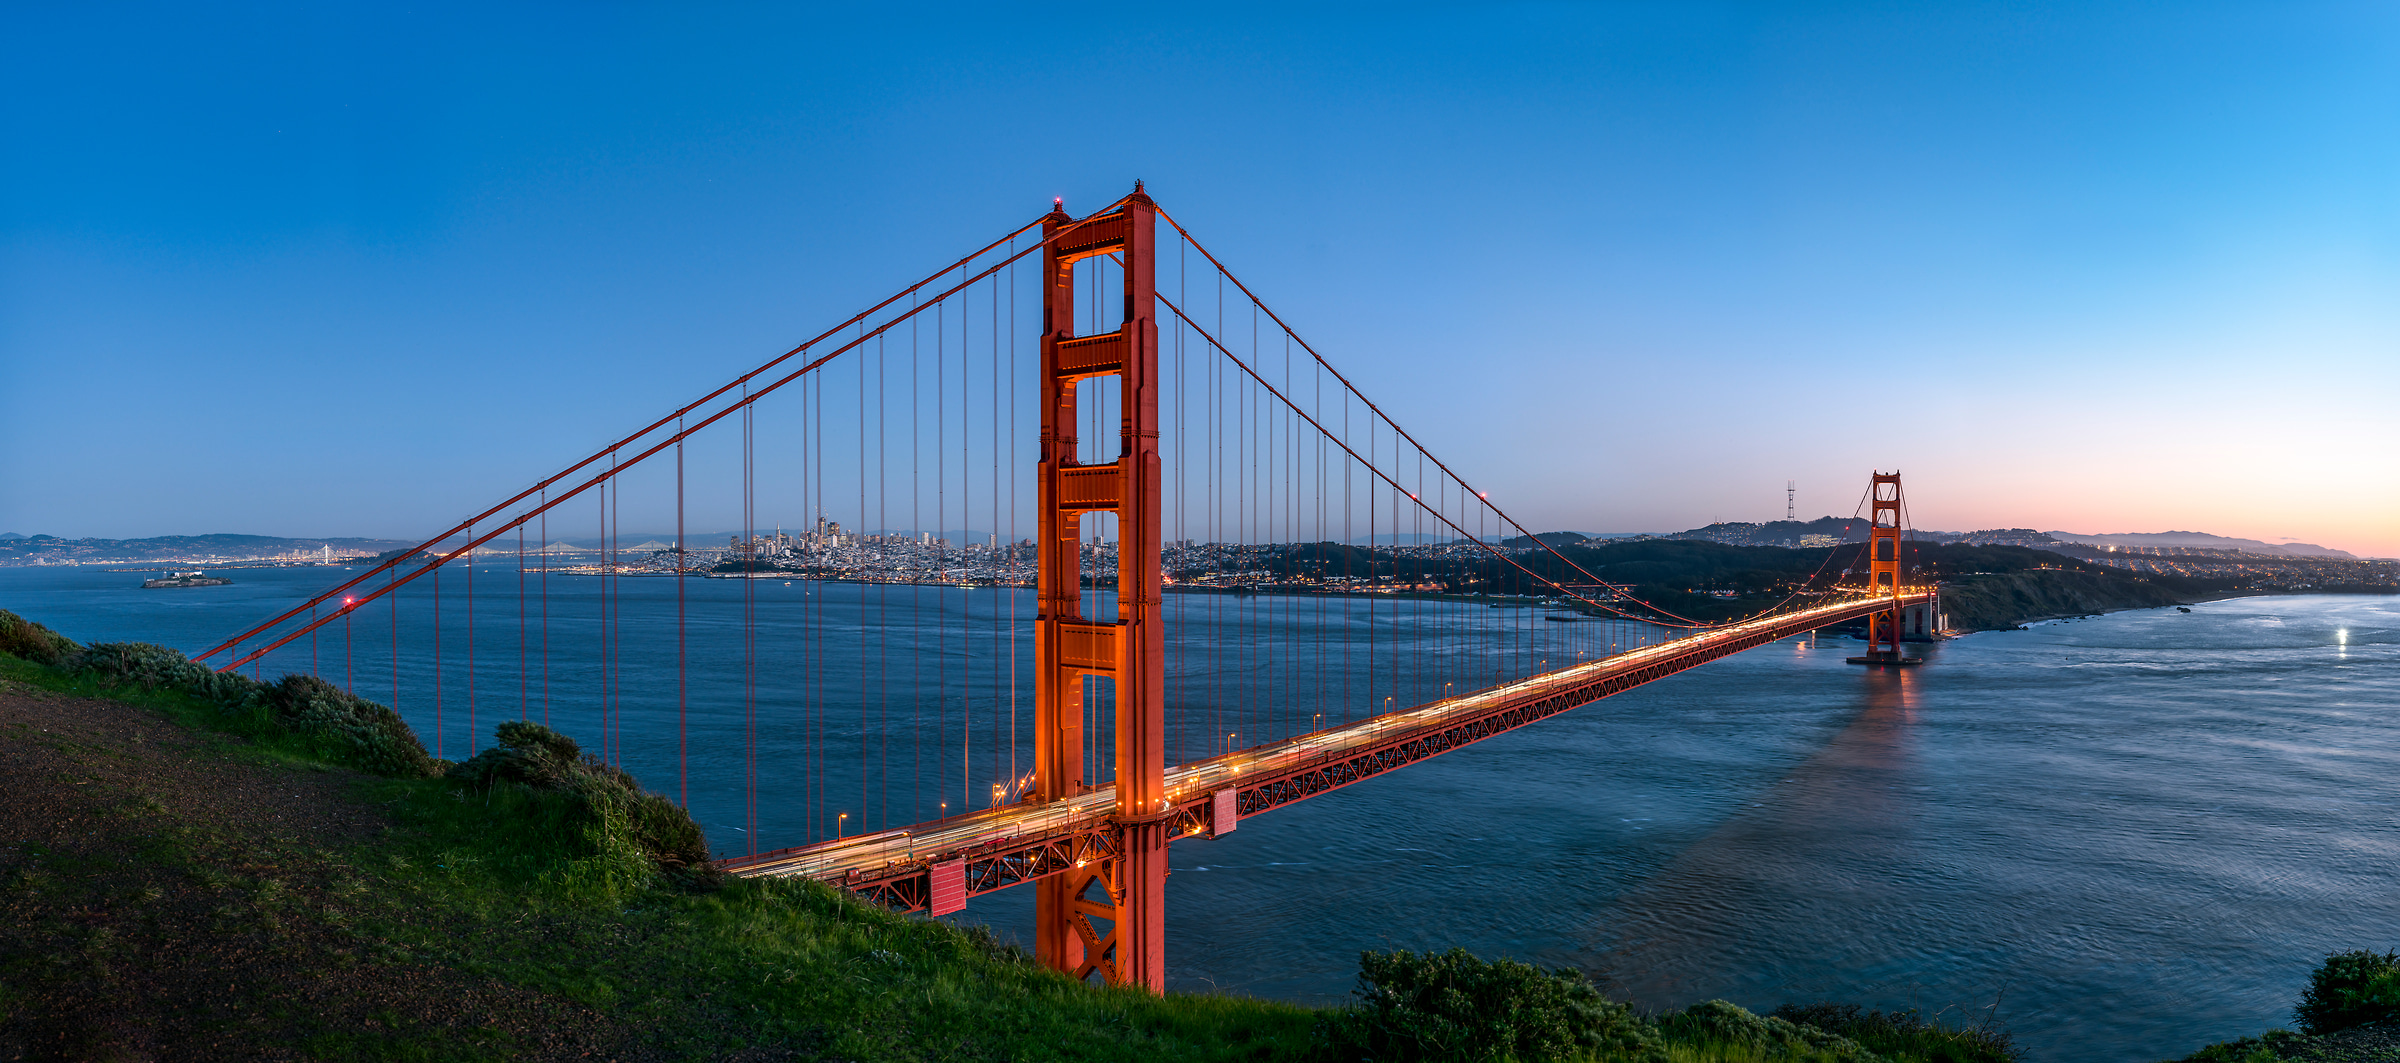 334 megapixels! A very high resolution, large-format VAST photo print of the Golden Gate Bridge, San Francisco, and the San Francisco Bay; cityscape fine art photo created by Justin Katz from Battery Spencer in Sausalito, California